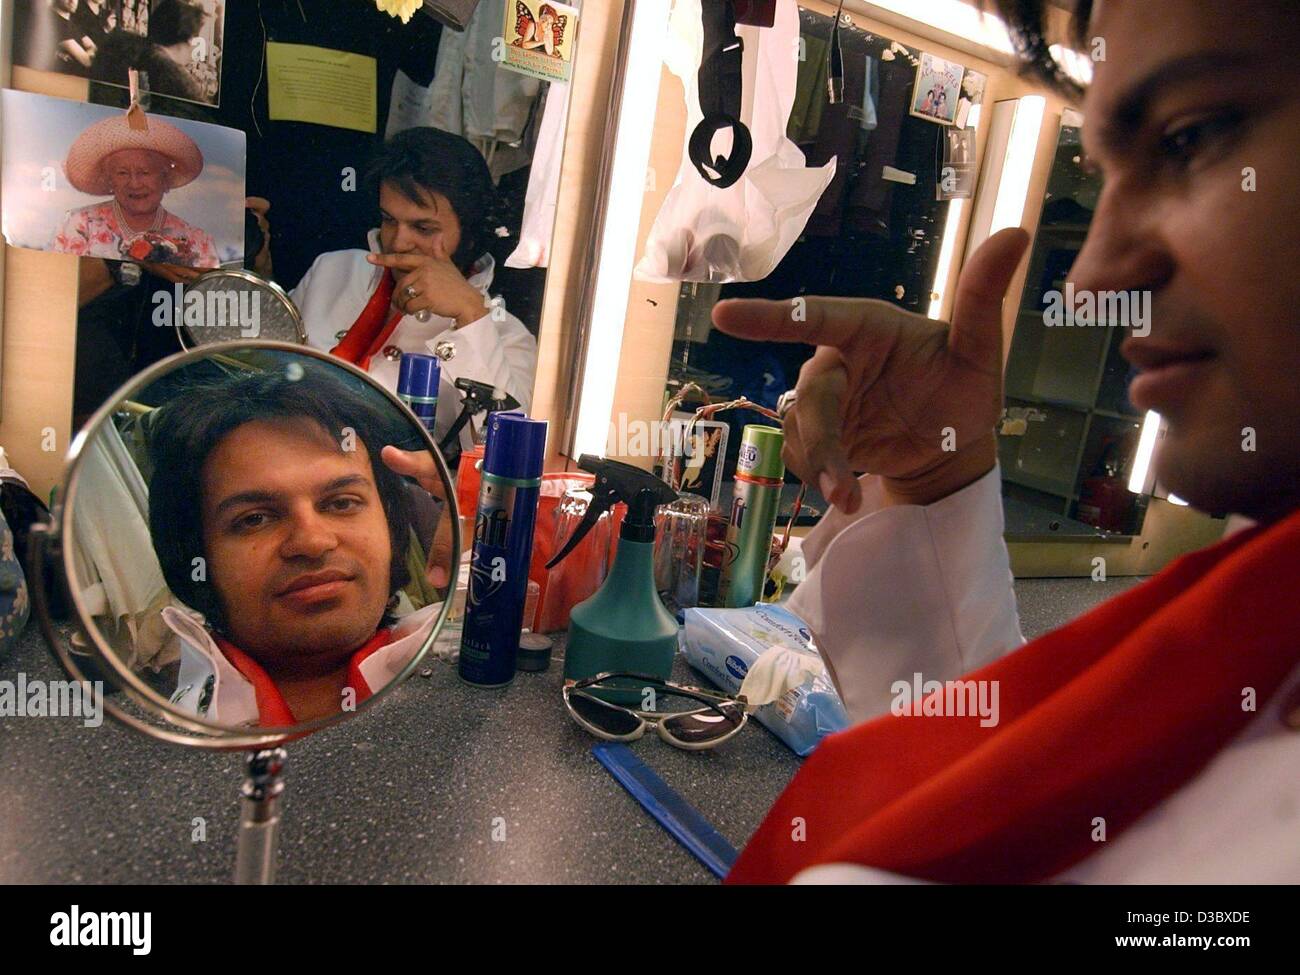 (dpa) - Elvis Presley impersonator Shelvis sits in his dressing room and looks in a small mirror while is image is reflected in the larger mirror in front of him at the 'Angies' nightclub in Hamburg, Germany, 12 August 2003. Shelvis will revive Elvis Presley in a pup on 16 August 2003, which is the  Stock Photo